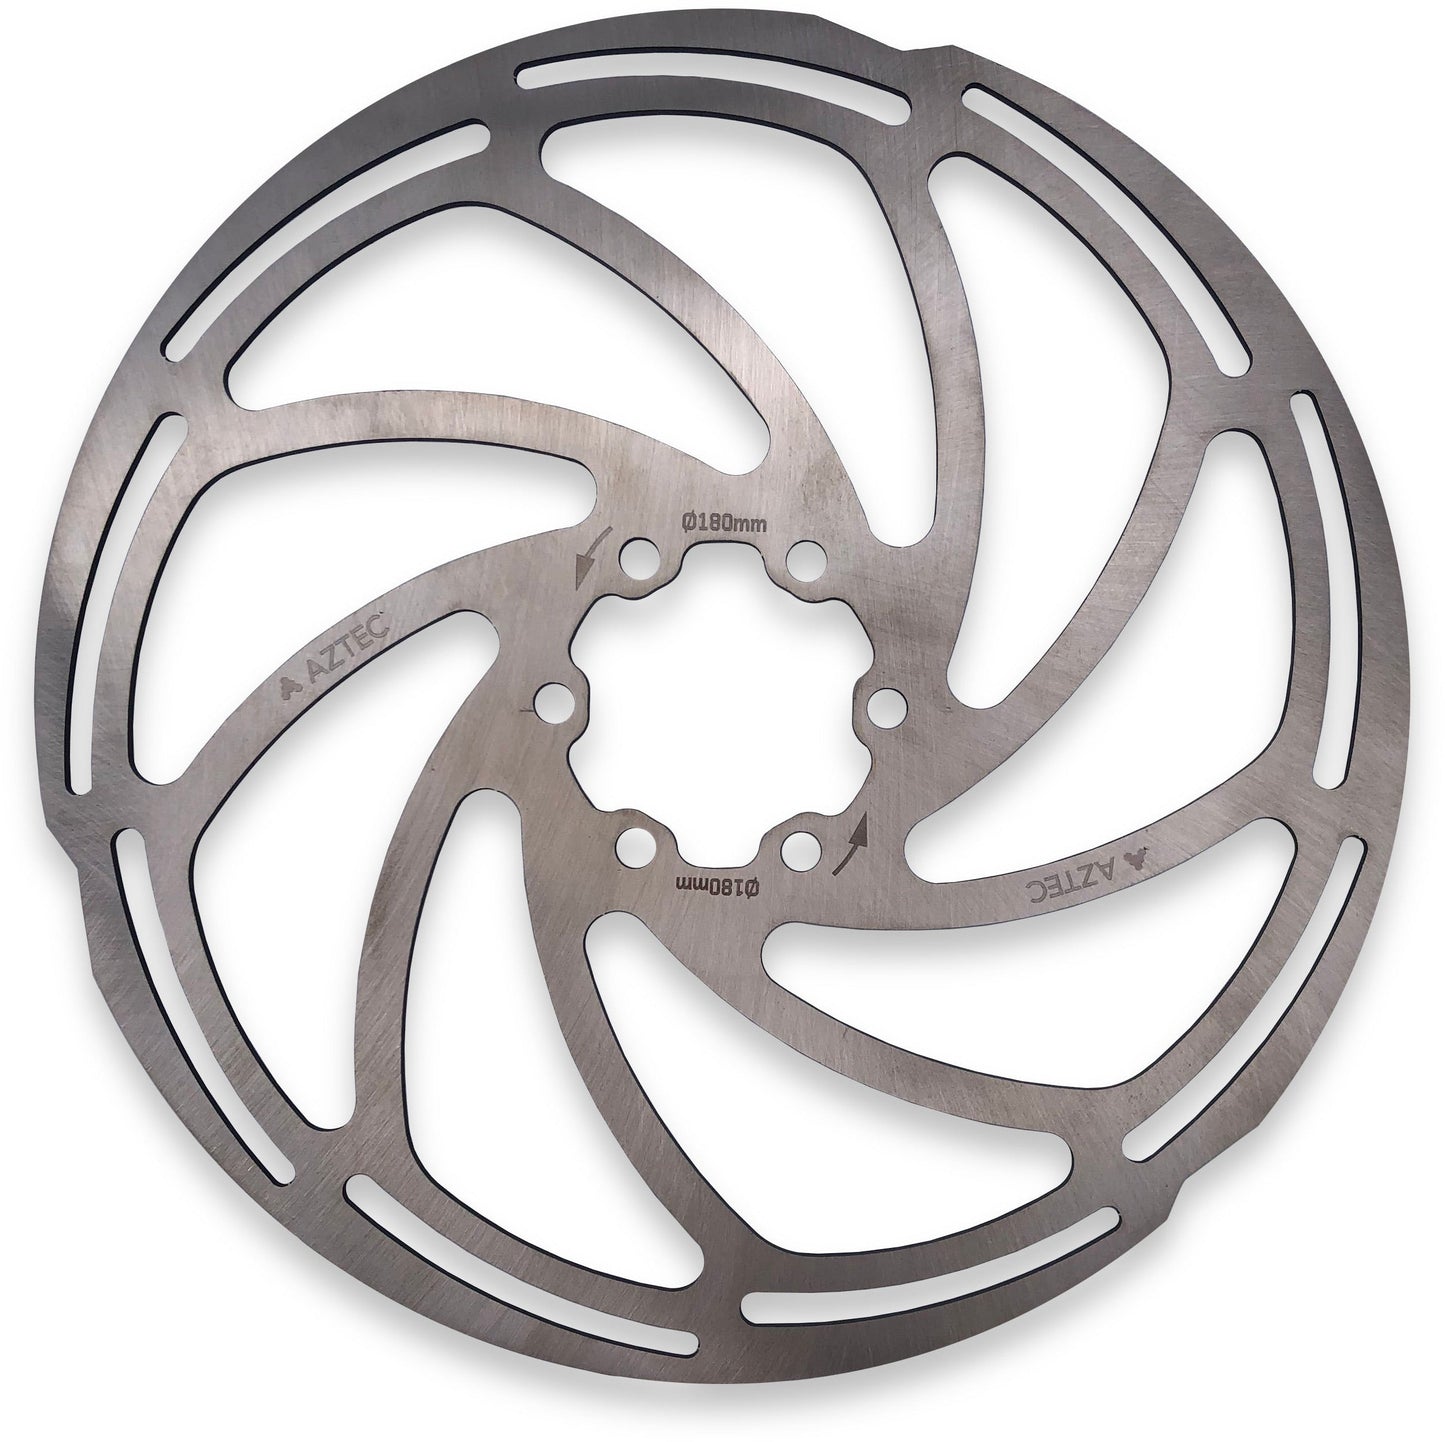 AZTEC FIXED STAINLESS STEEL 6 BOLT DISC ROTOR - 220MM